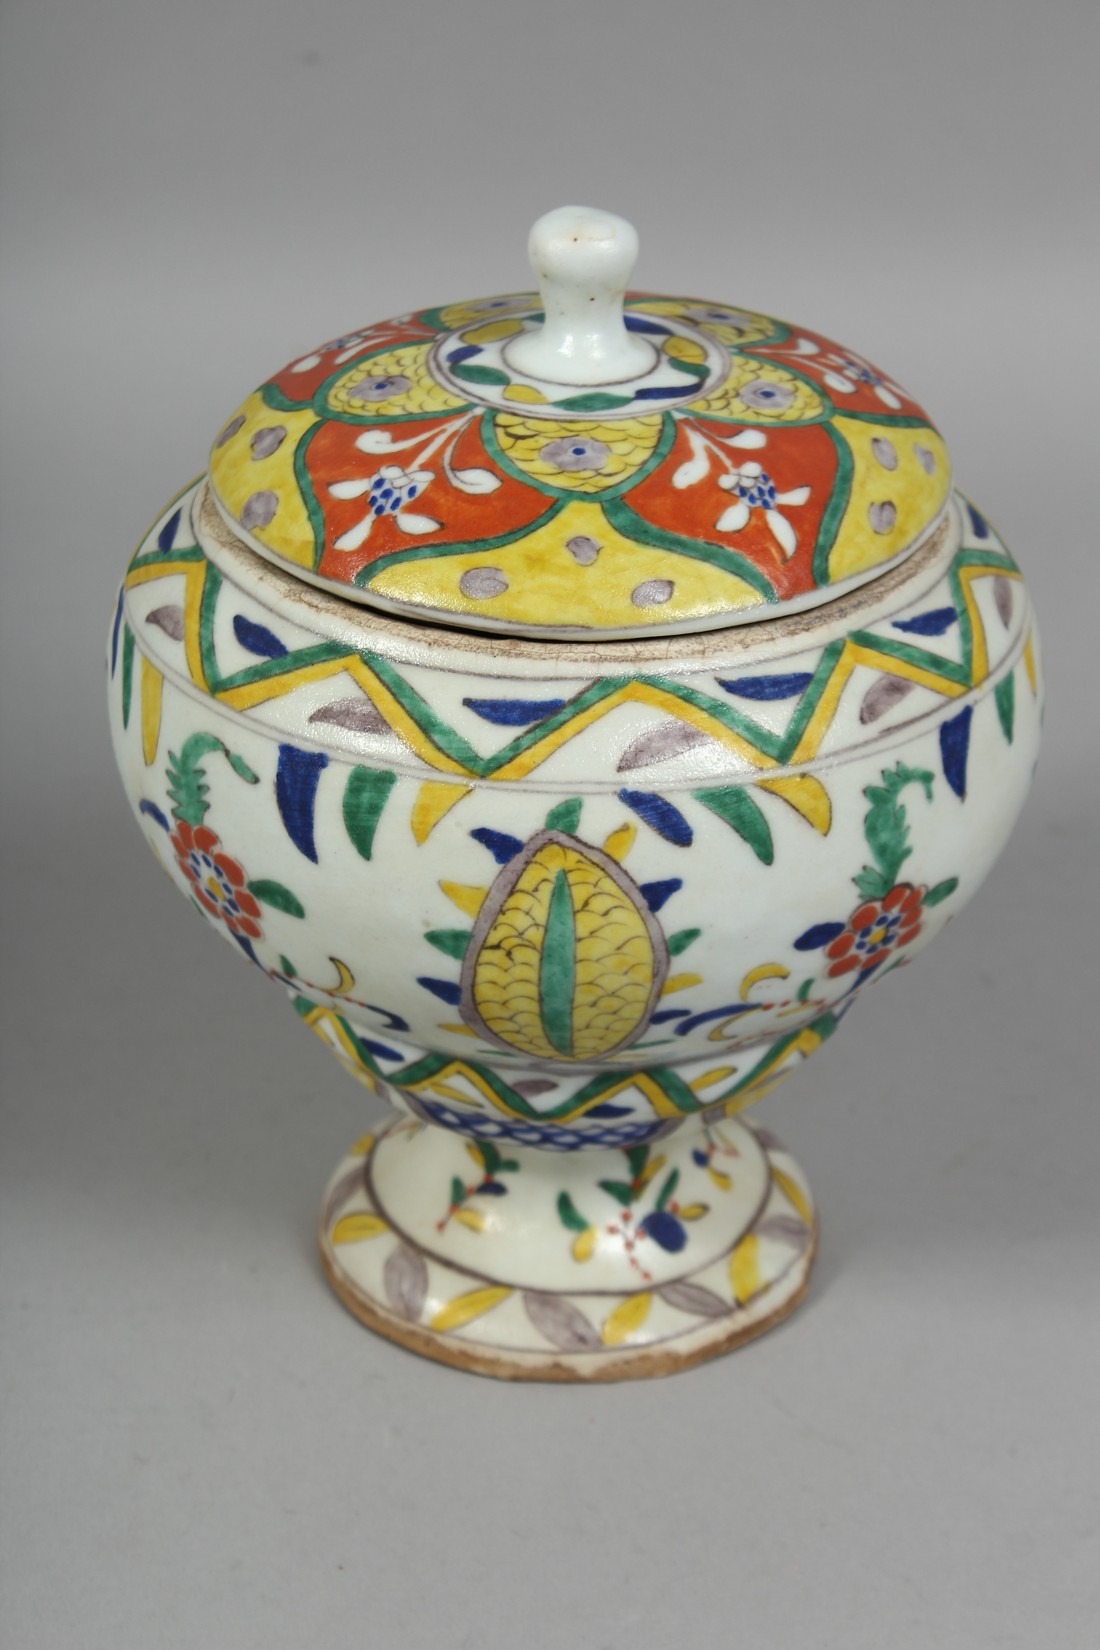 A TURKISH KUTAHYA POTTERY PEDESTAL SUGAR BOWL AND COVER, painted with various floral motifs, overall - Image 4 of 8